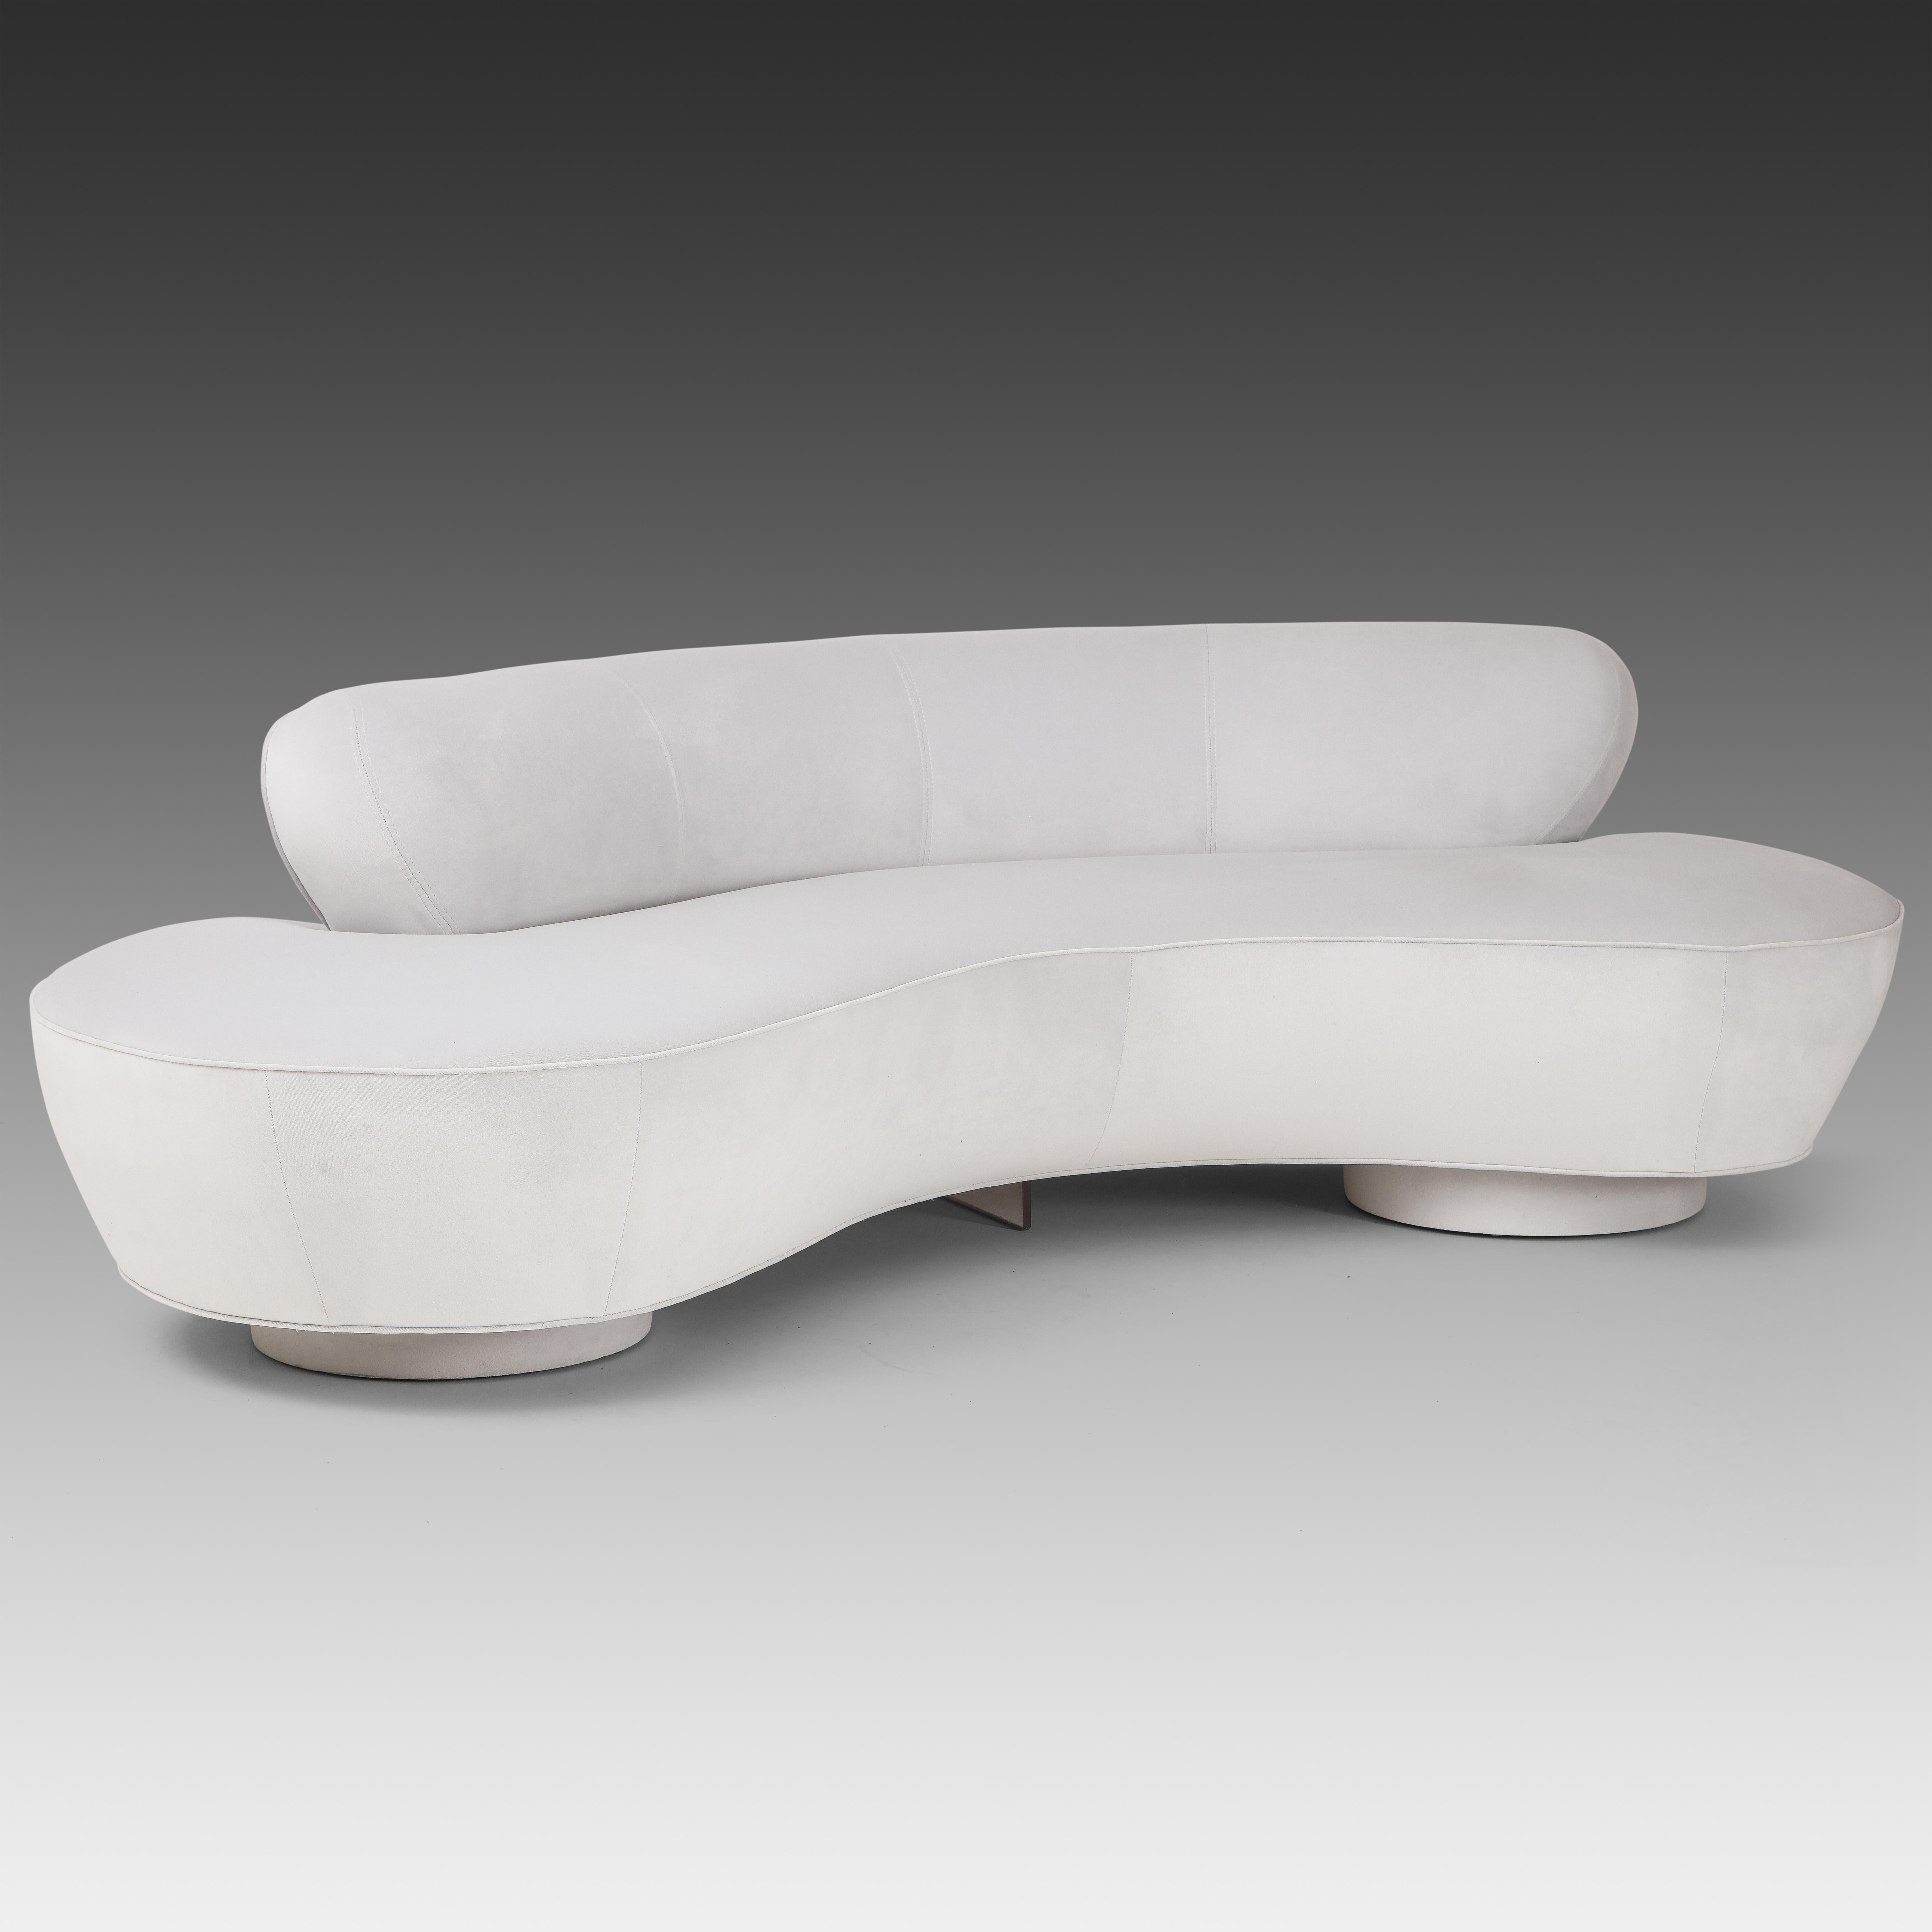 Vladimir Kagan for Directional iconic curved sofa with characteristic upholstered round plinth bases and Lucite stretcher.  This sofa has recently been restored and reupholstered in very pale gray velvet fabric.

Literature:
The Complete Kagan: A